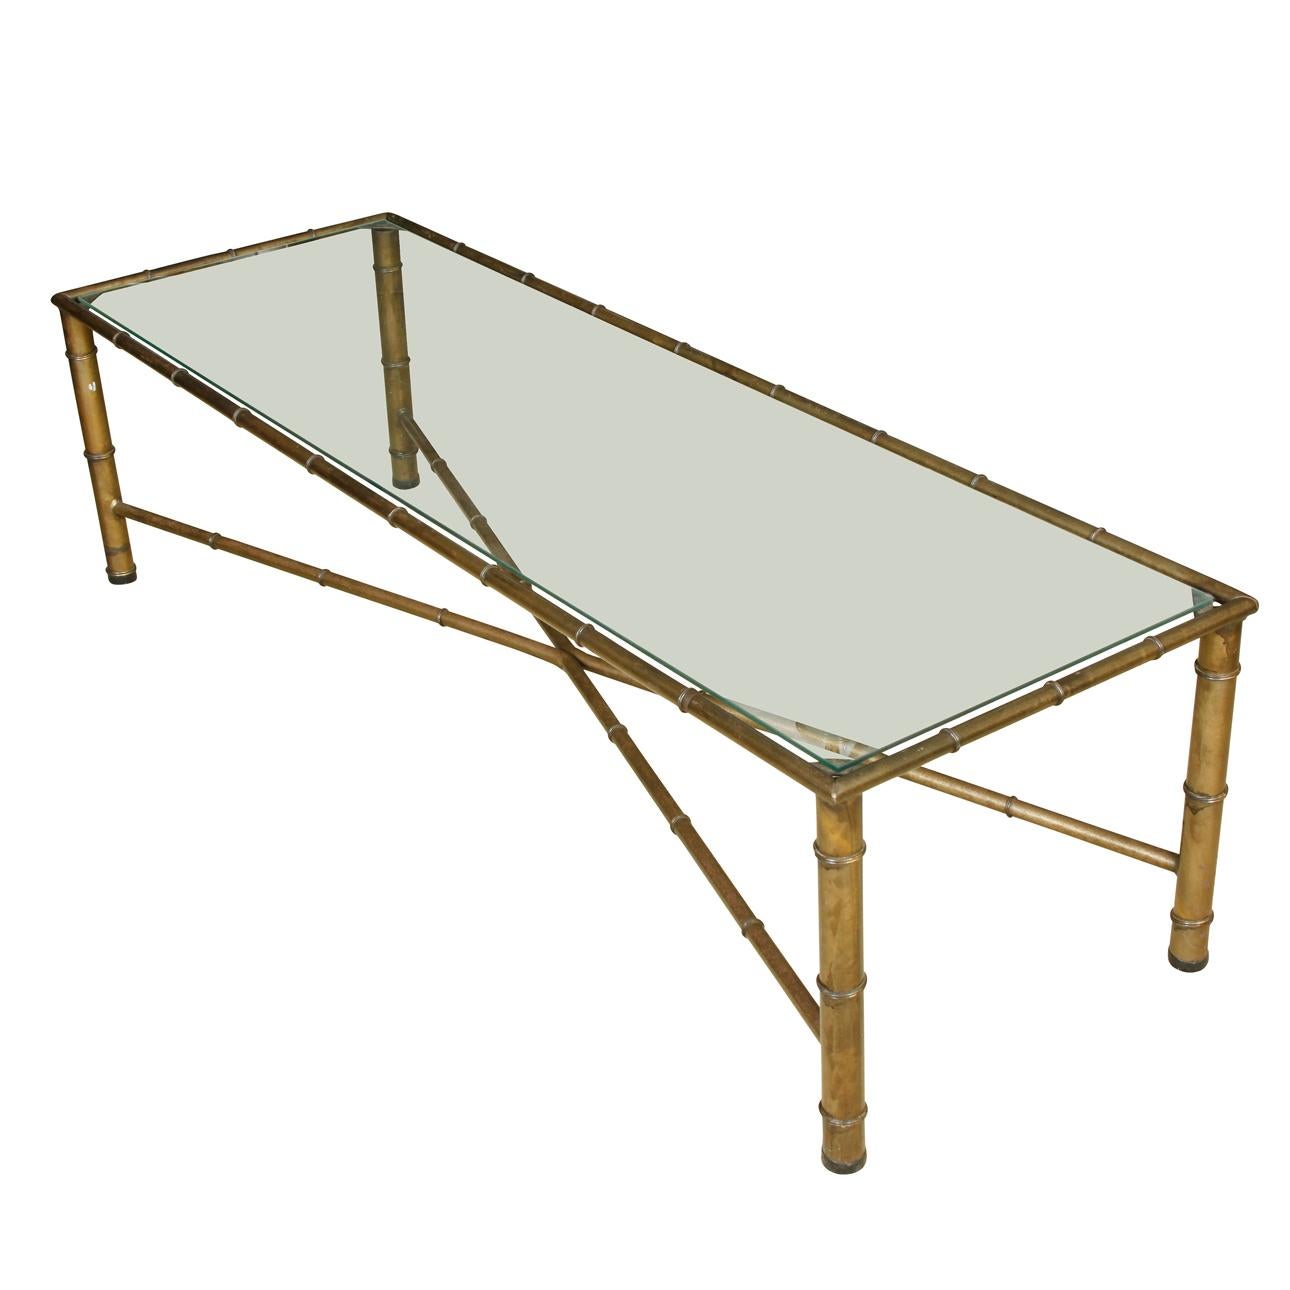 20th Century Gilt Metal Bamboo Long Rectangular Glass Top Coffee Table with X-Stretcher